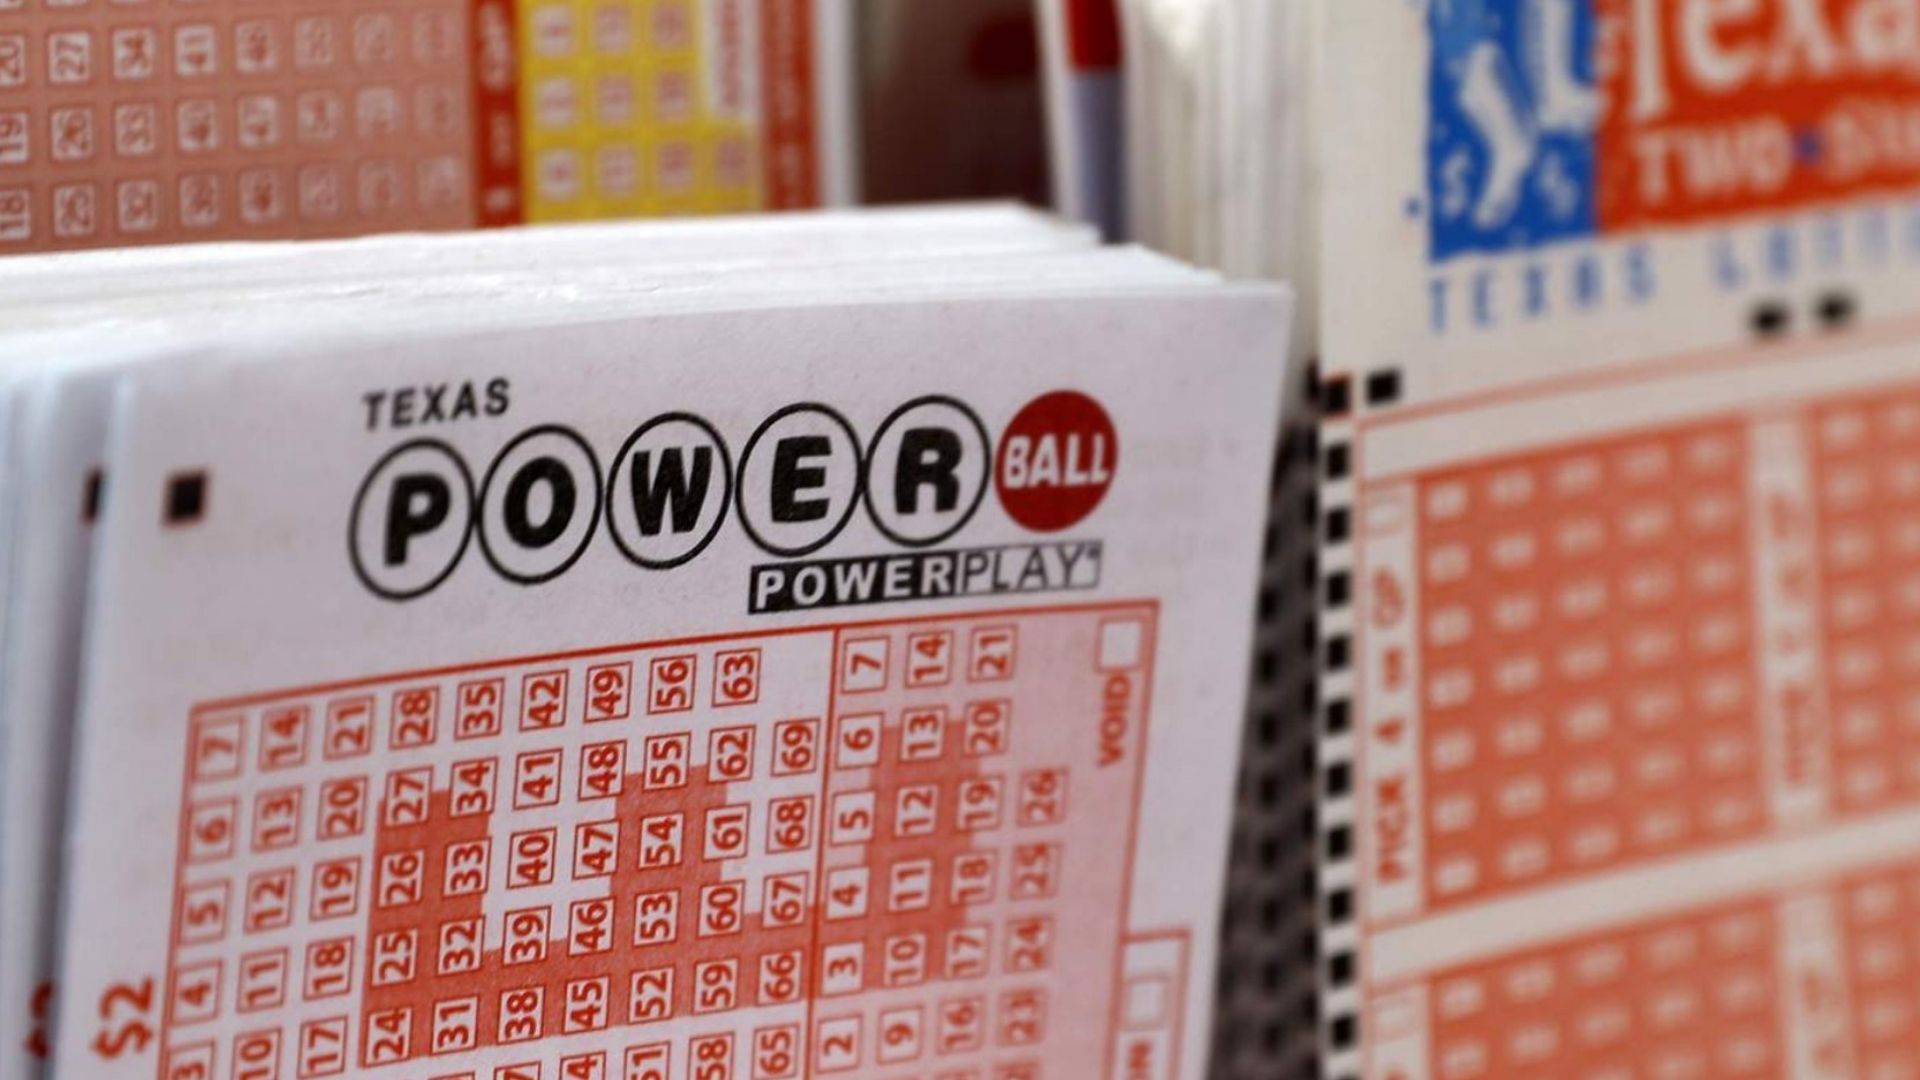 The Powerball jackpot of $632.6 million, the seventh-largest in the game's history, is won by two ticketholders